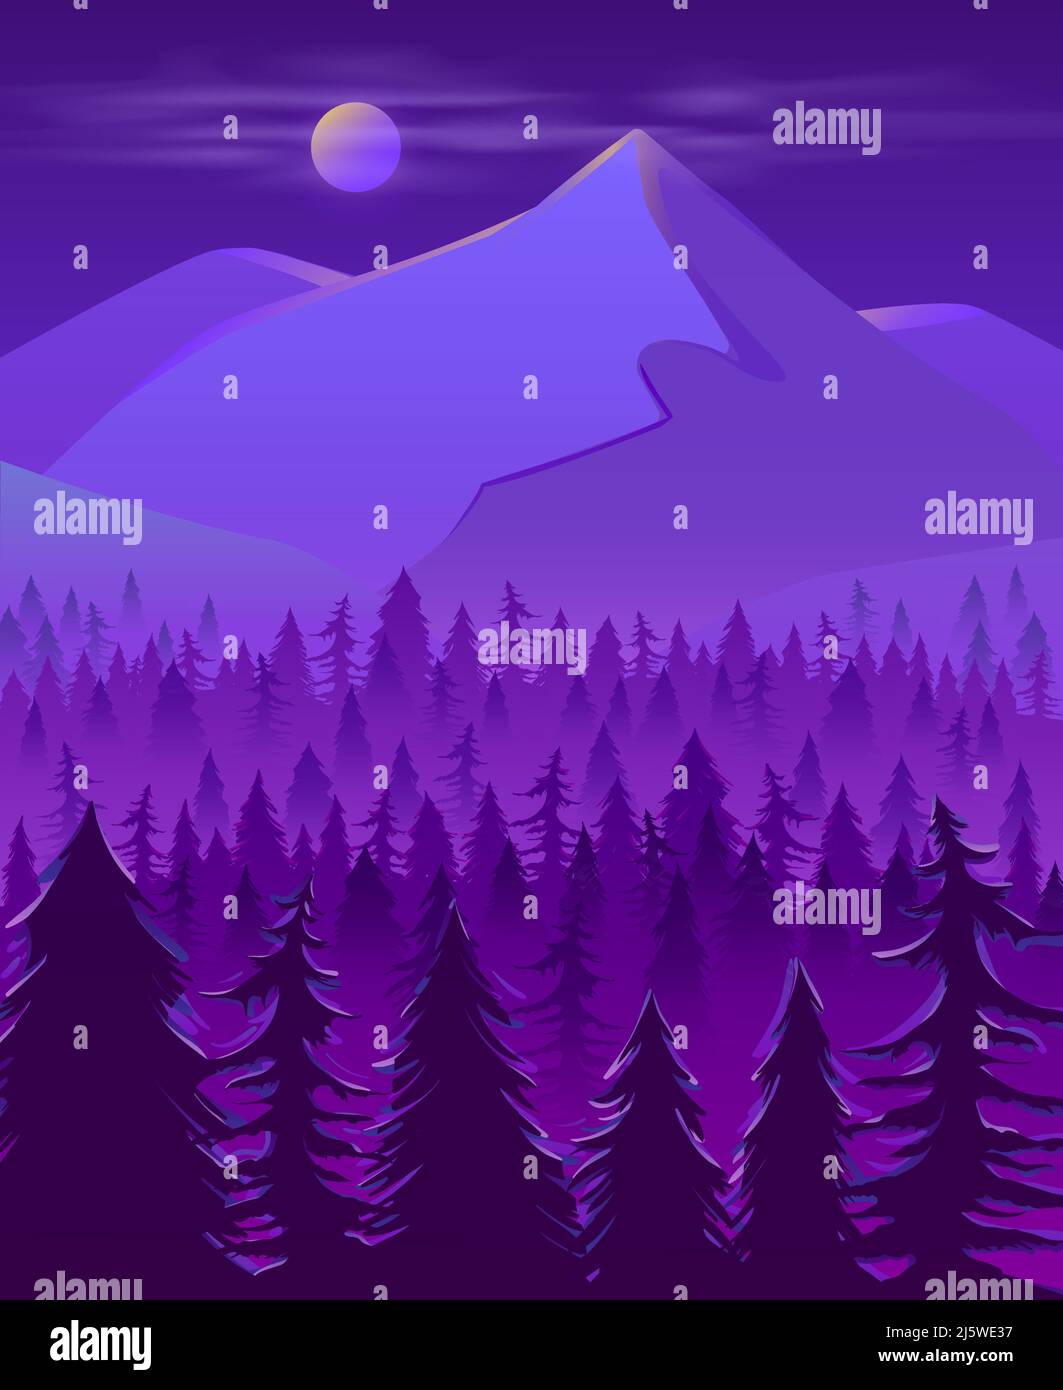 Cold and wild northern land night landscape cartoon vector in violet neon colors with full moon disk in mist under snow-cowered mountain peak or hill, Stock Vector